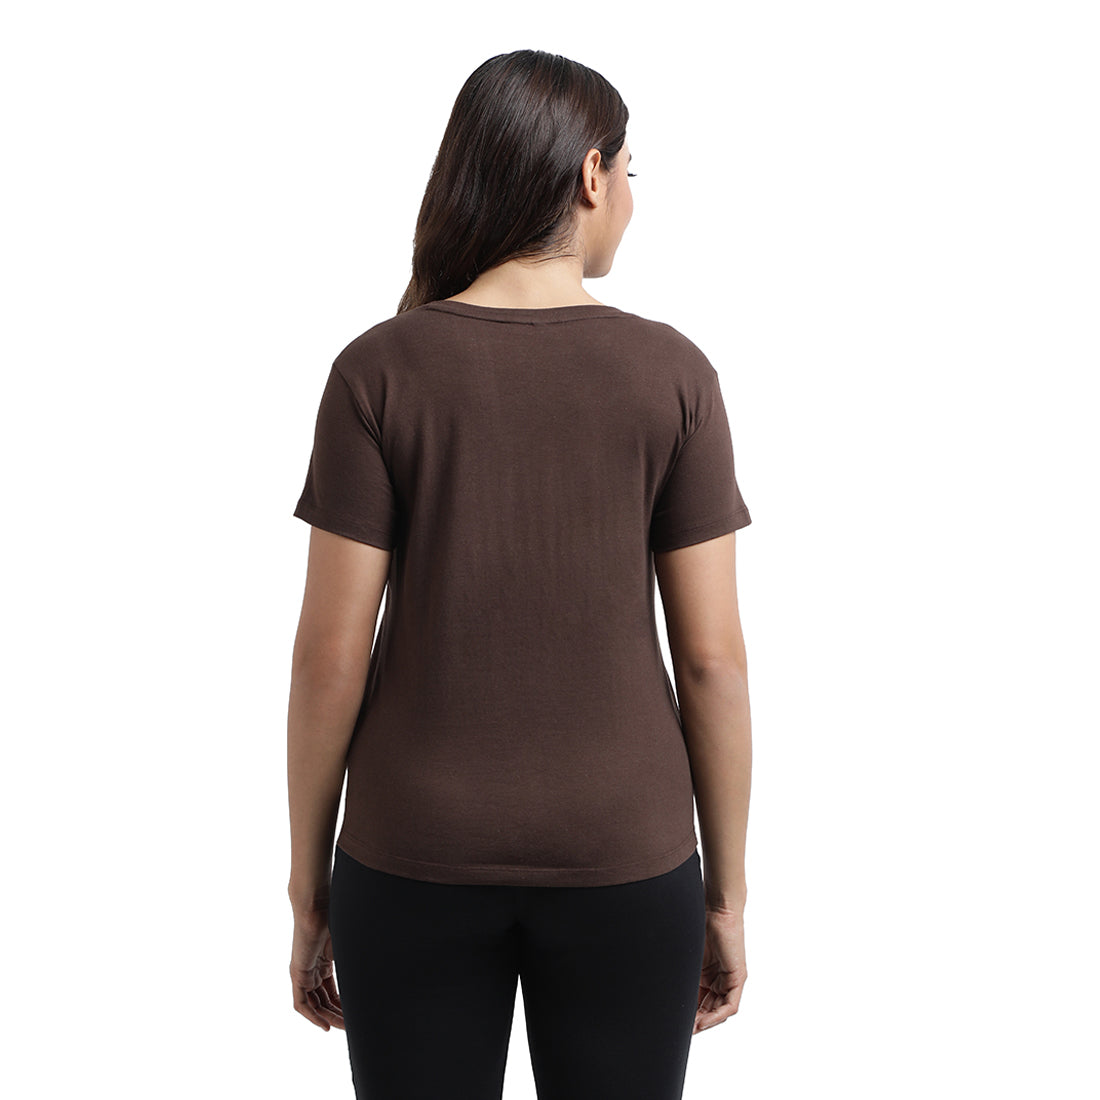 Cotton Workout Tee - Brown - Back Image